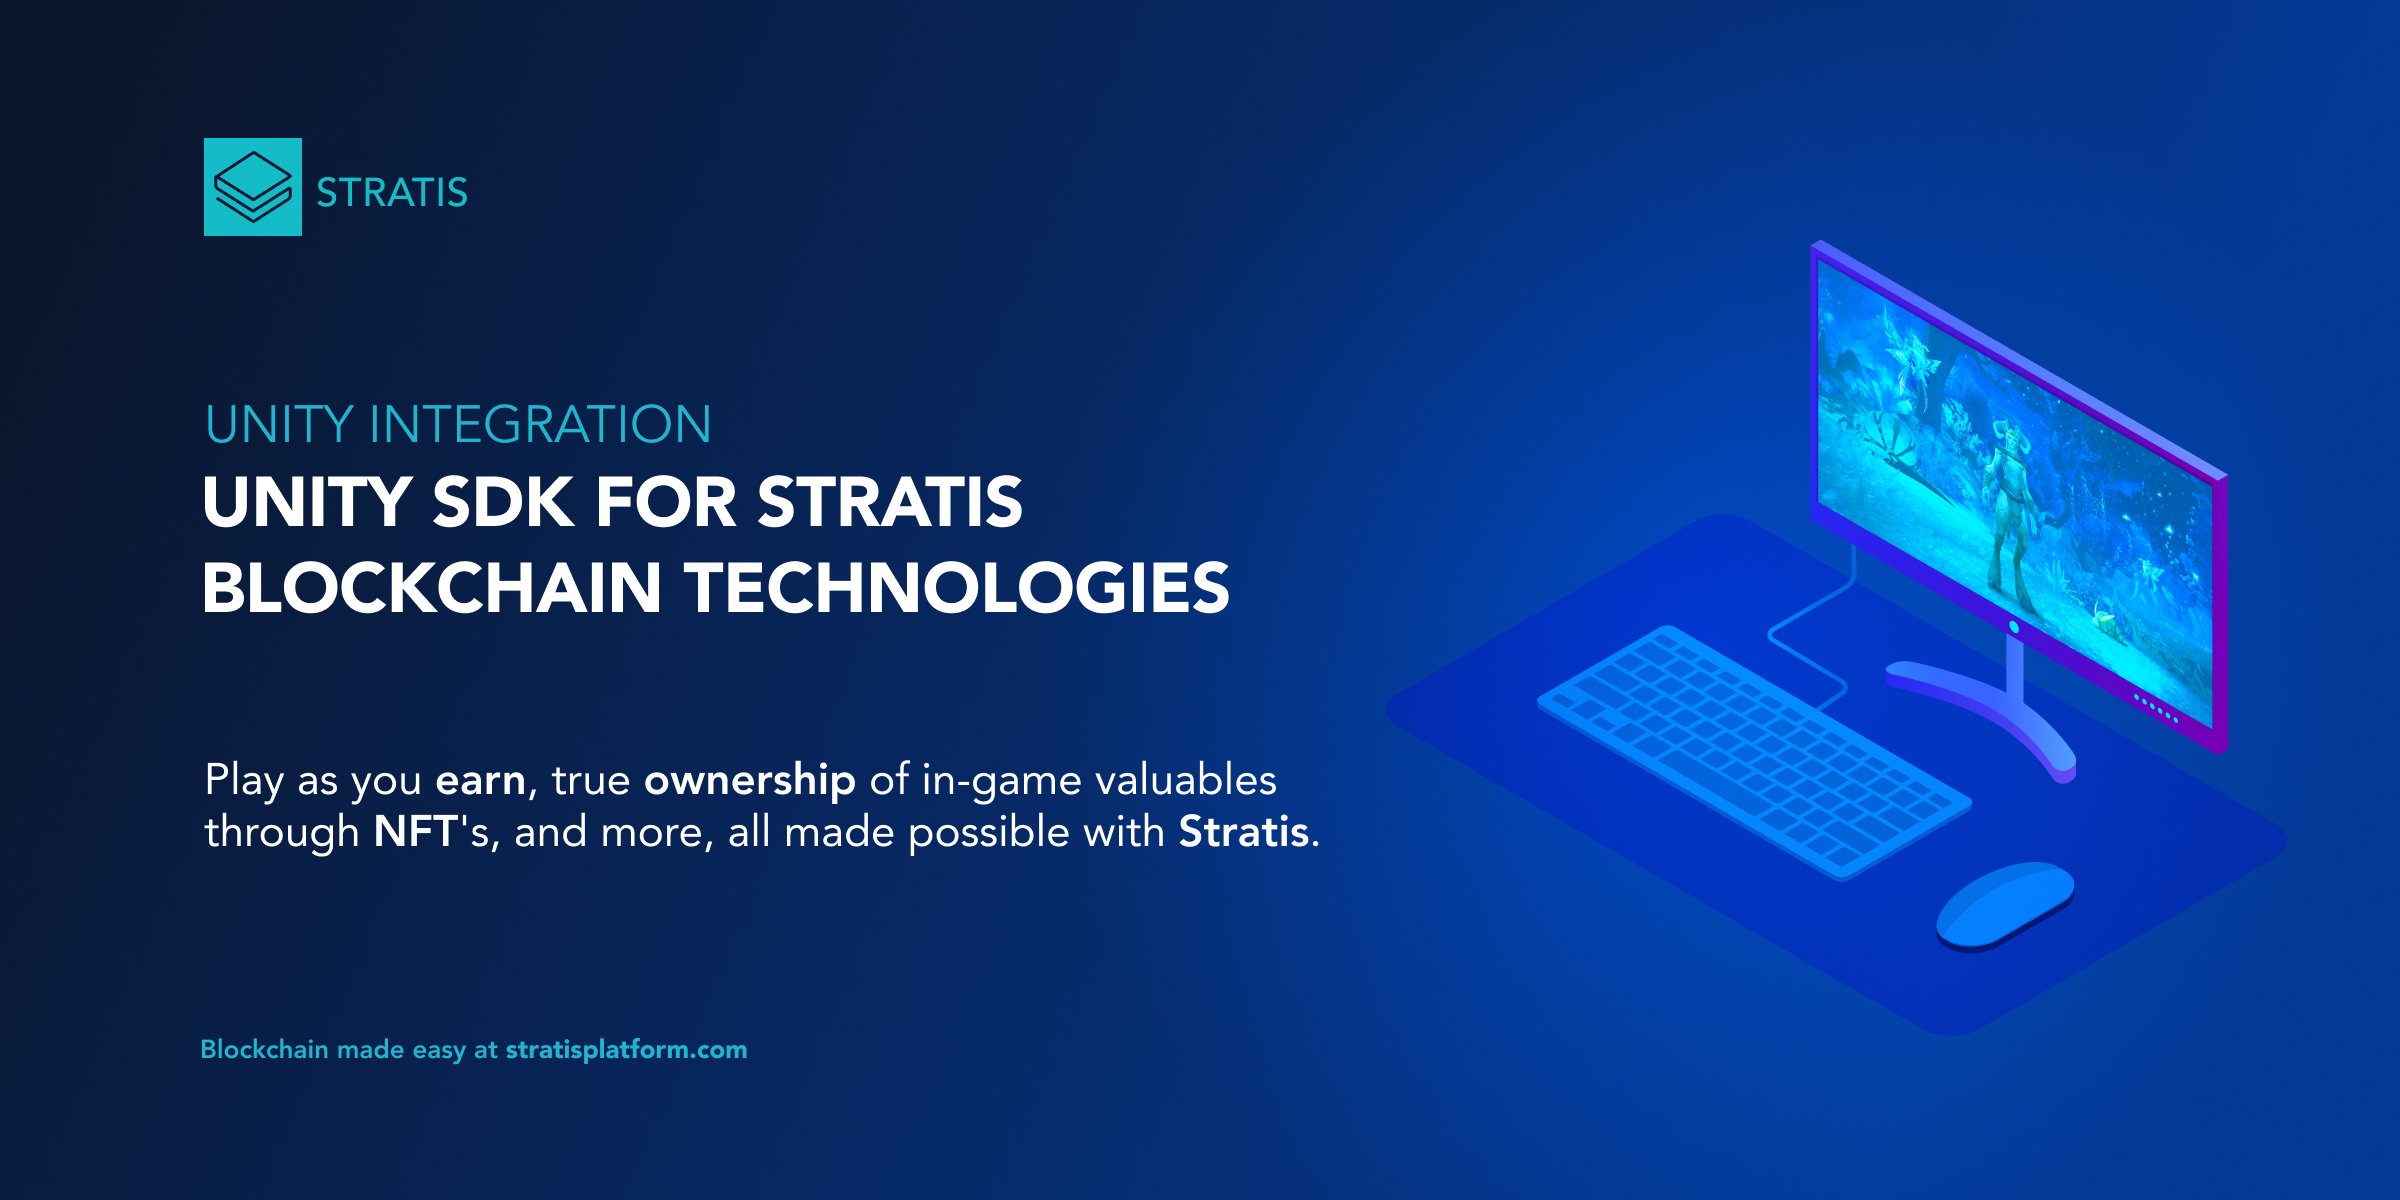 Unity SDK brings Stratis Smart Contracts to games